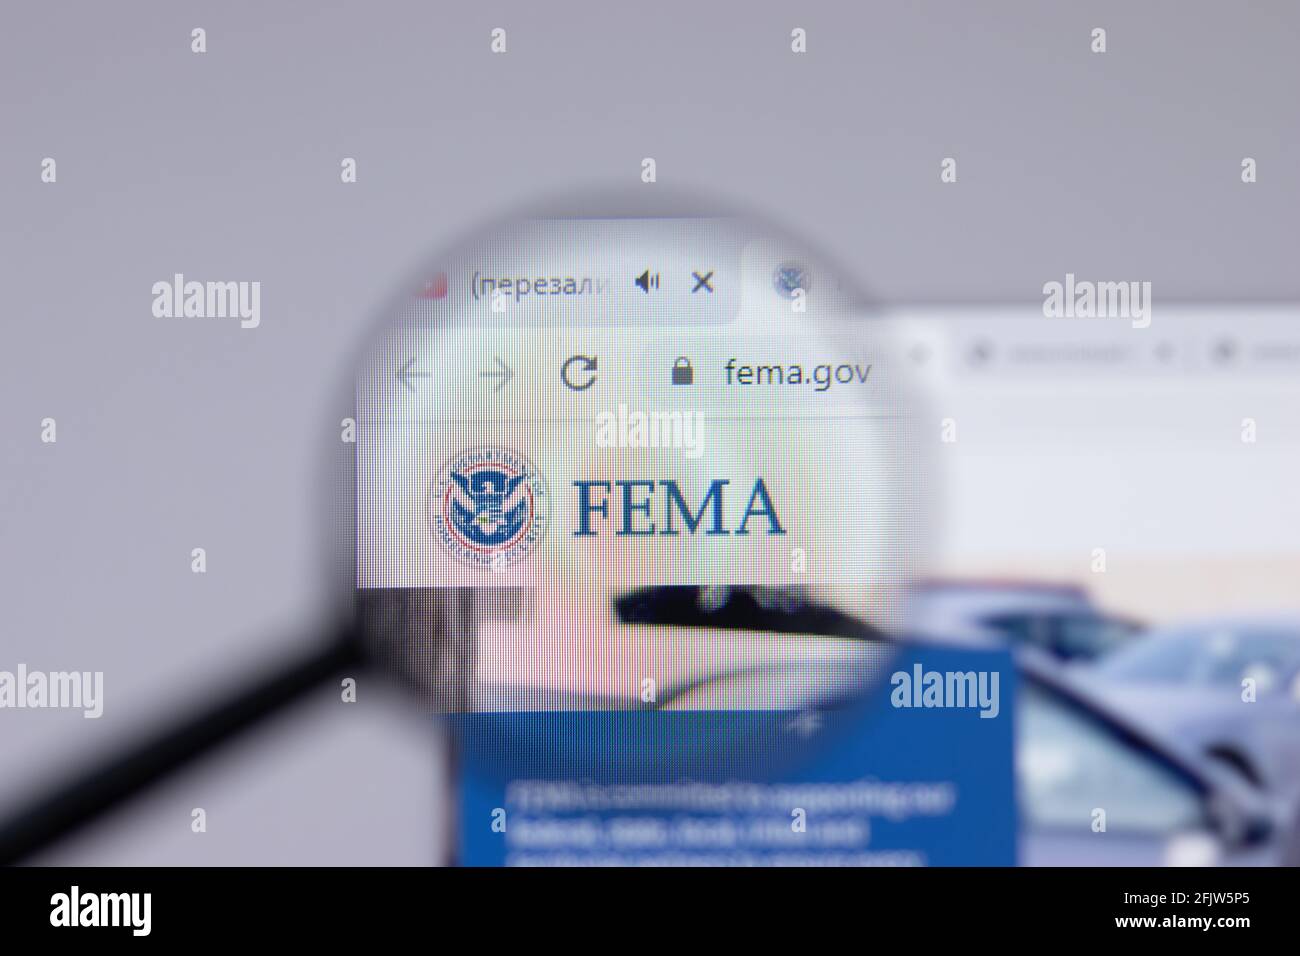 New York, USA - 26 April 2021: Federal Emergency Management Agency FEMA logo close-up on website page, Illustrative Editorial Stock Photo